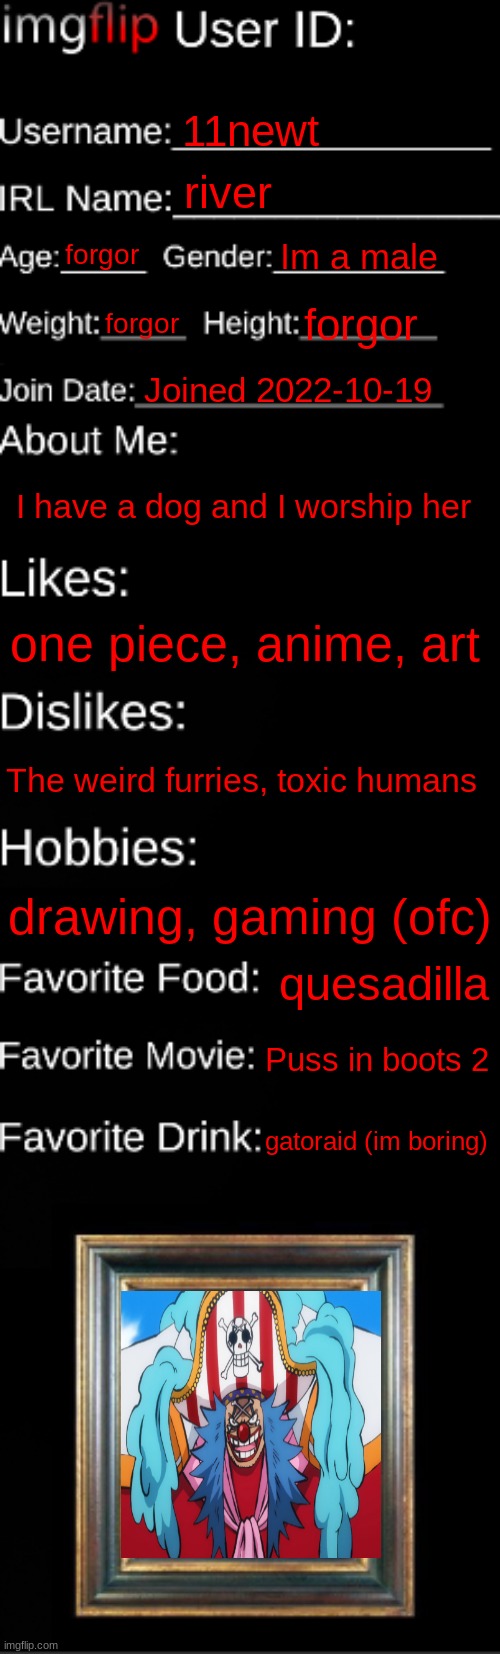 fax | 11newt; river; forgor; Im a male; forgor; forgor; Joined 2022-10-19; I have a dog and I worship her; one piece, anime, art; The weird furries, toxic humans; drawing, gaming (ofc); quesadilla; Puss in boots 2; gatoraid (im boring) | image tagged in imgflip id card | made w/ Imgflip meme maker